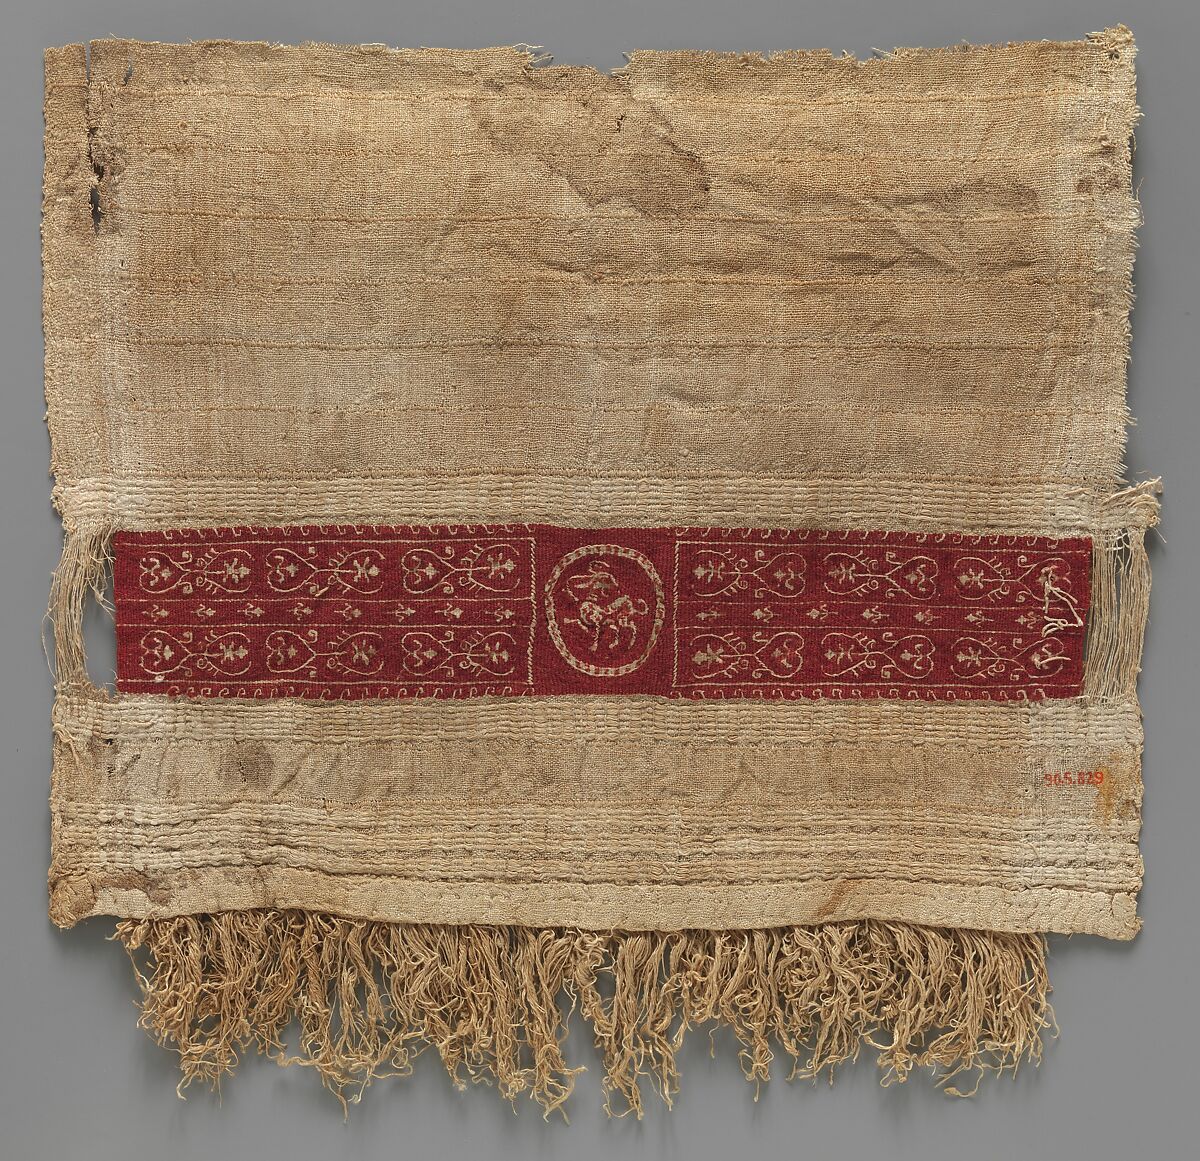 Sleeve Fragment with a Band Decorated with an Animal, Tapestry weave in red wool (dyed with madder) and undyed linen on plain-weave ground of undyed linen; details in flying shuttle in undyed linen; weft loop pile with undyed linen 